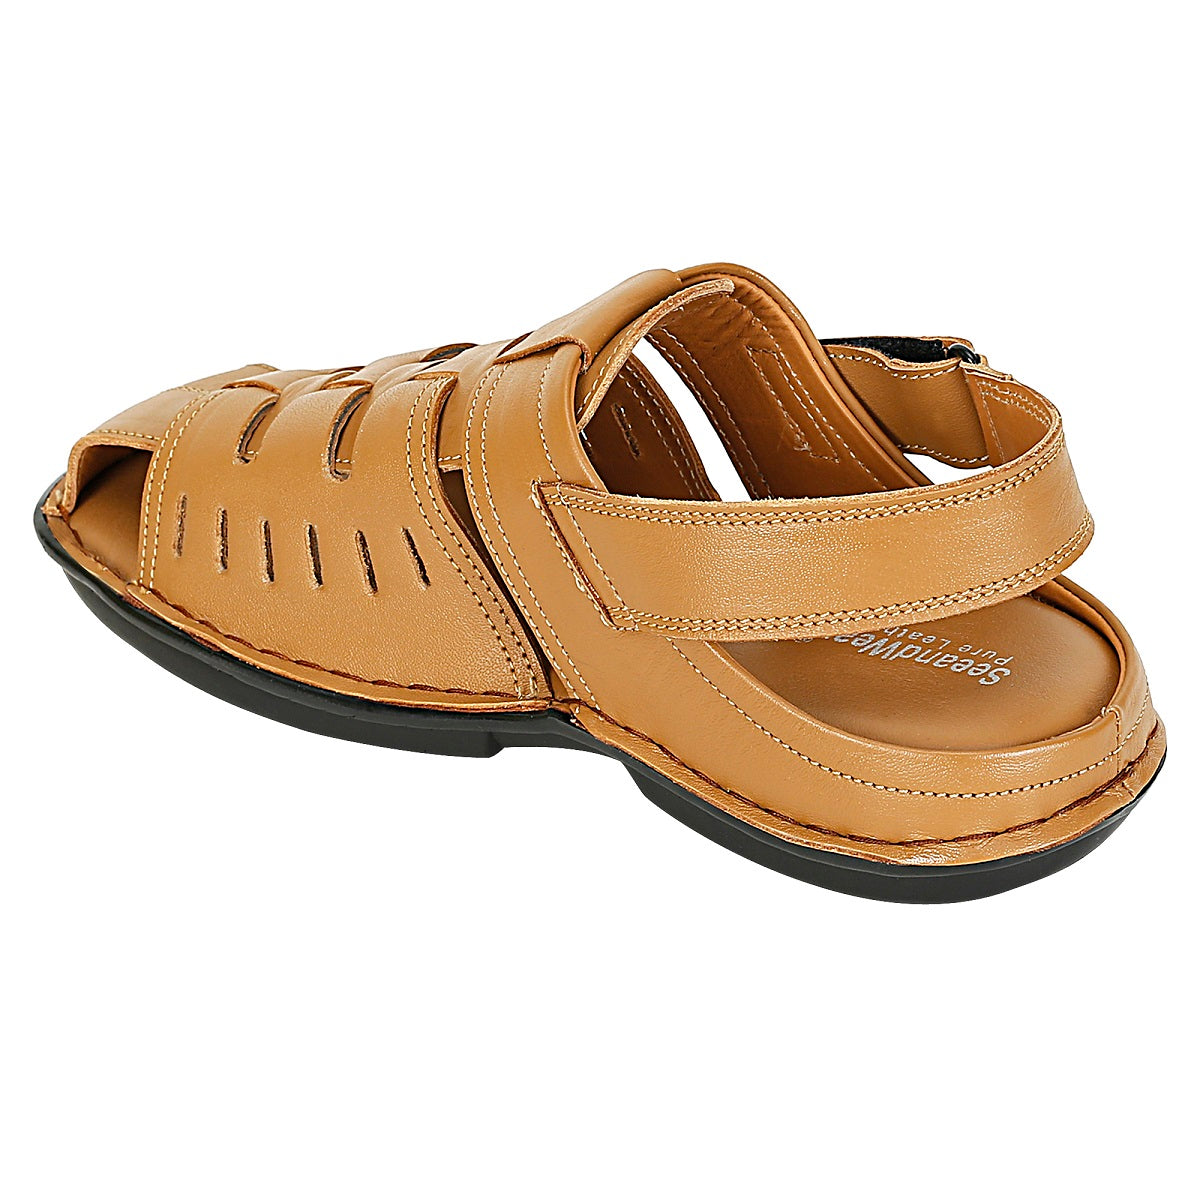 Mens Summer Pu Leather Sandals Beach Open Toe Sandles Sport Hiking Outdoor  Shoes | eBay